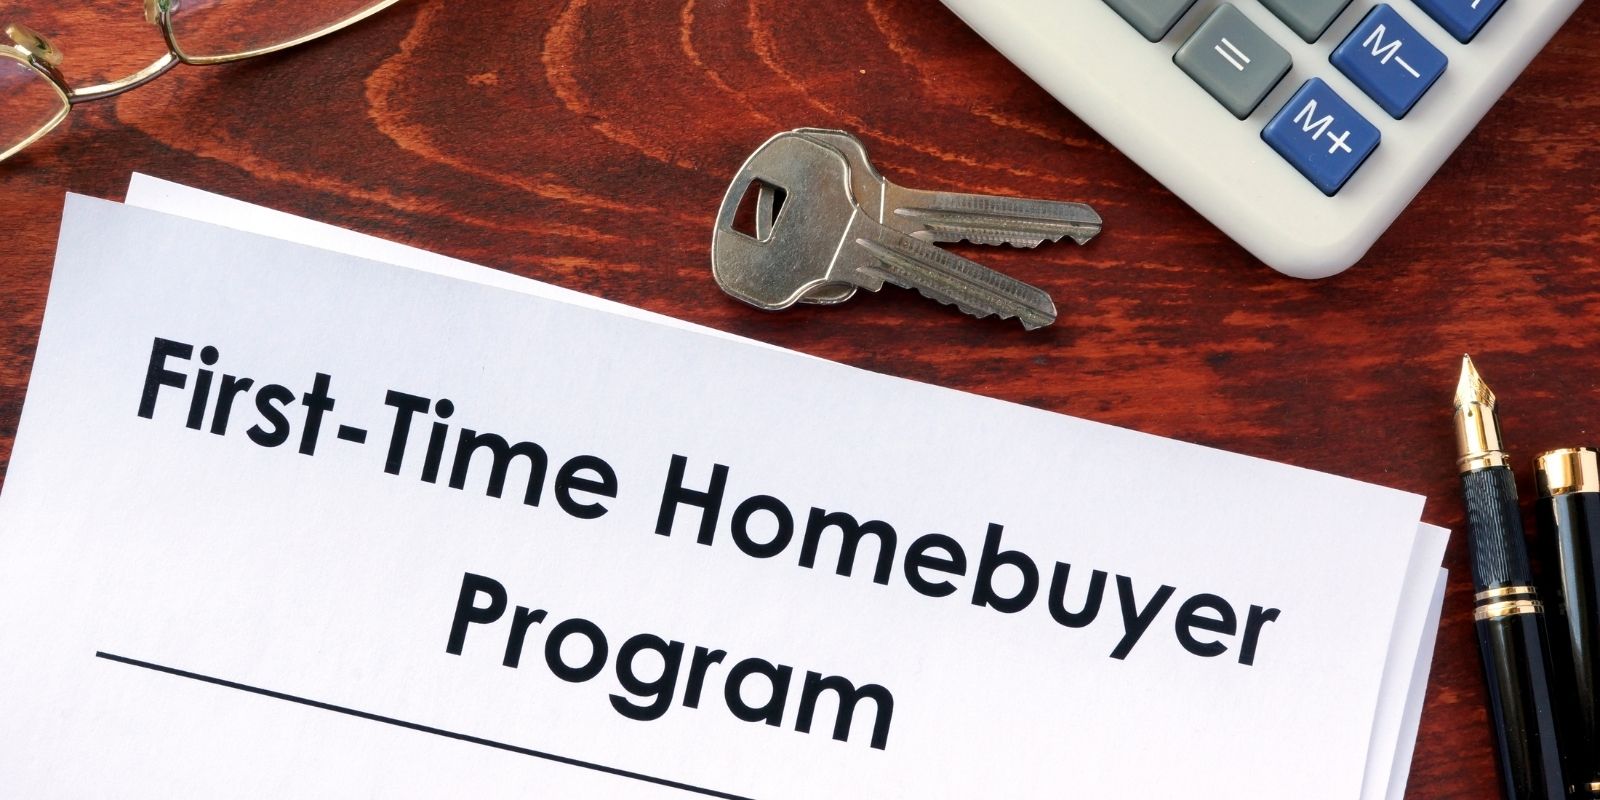 First-Time Homebuyer Programs